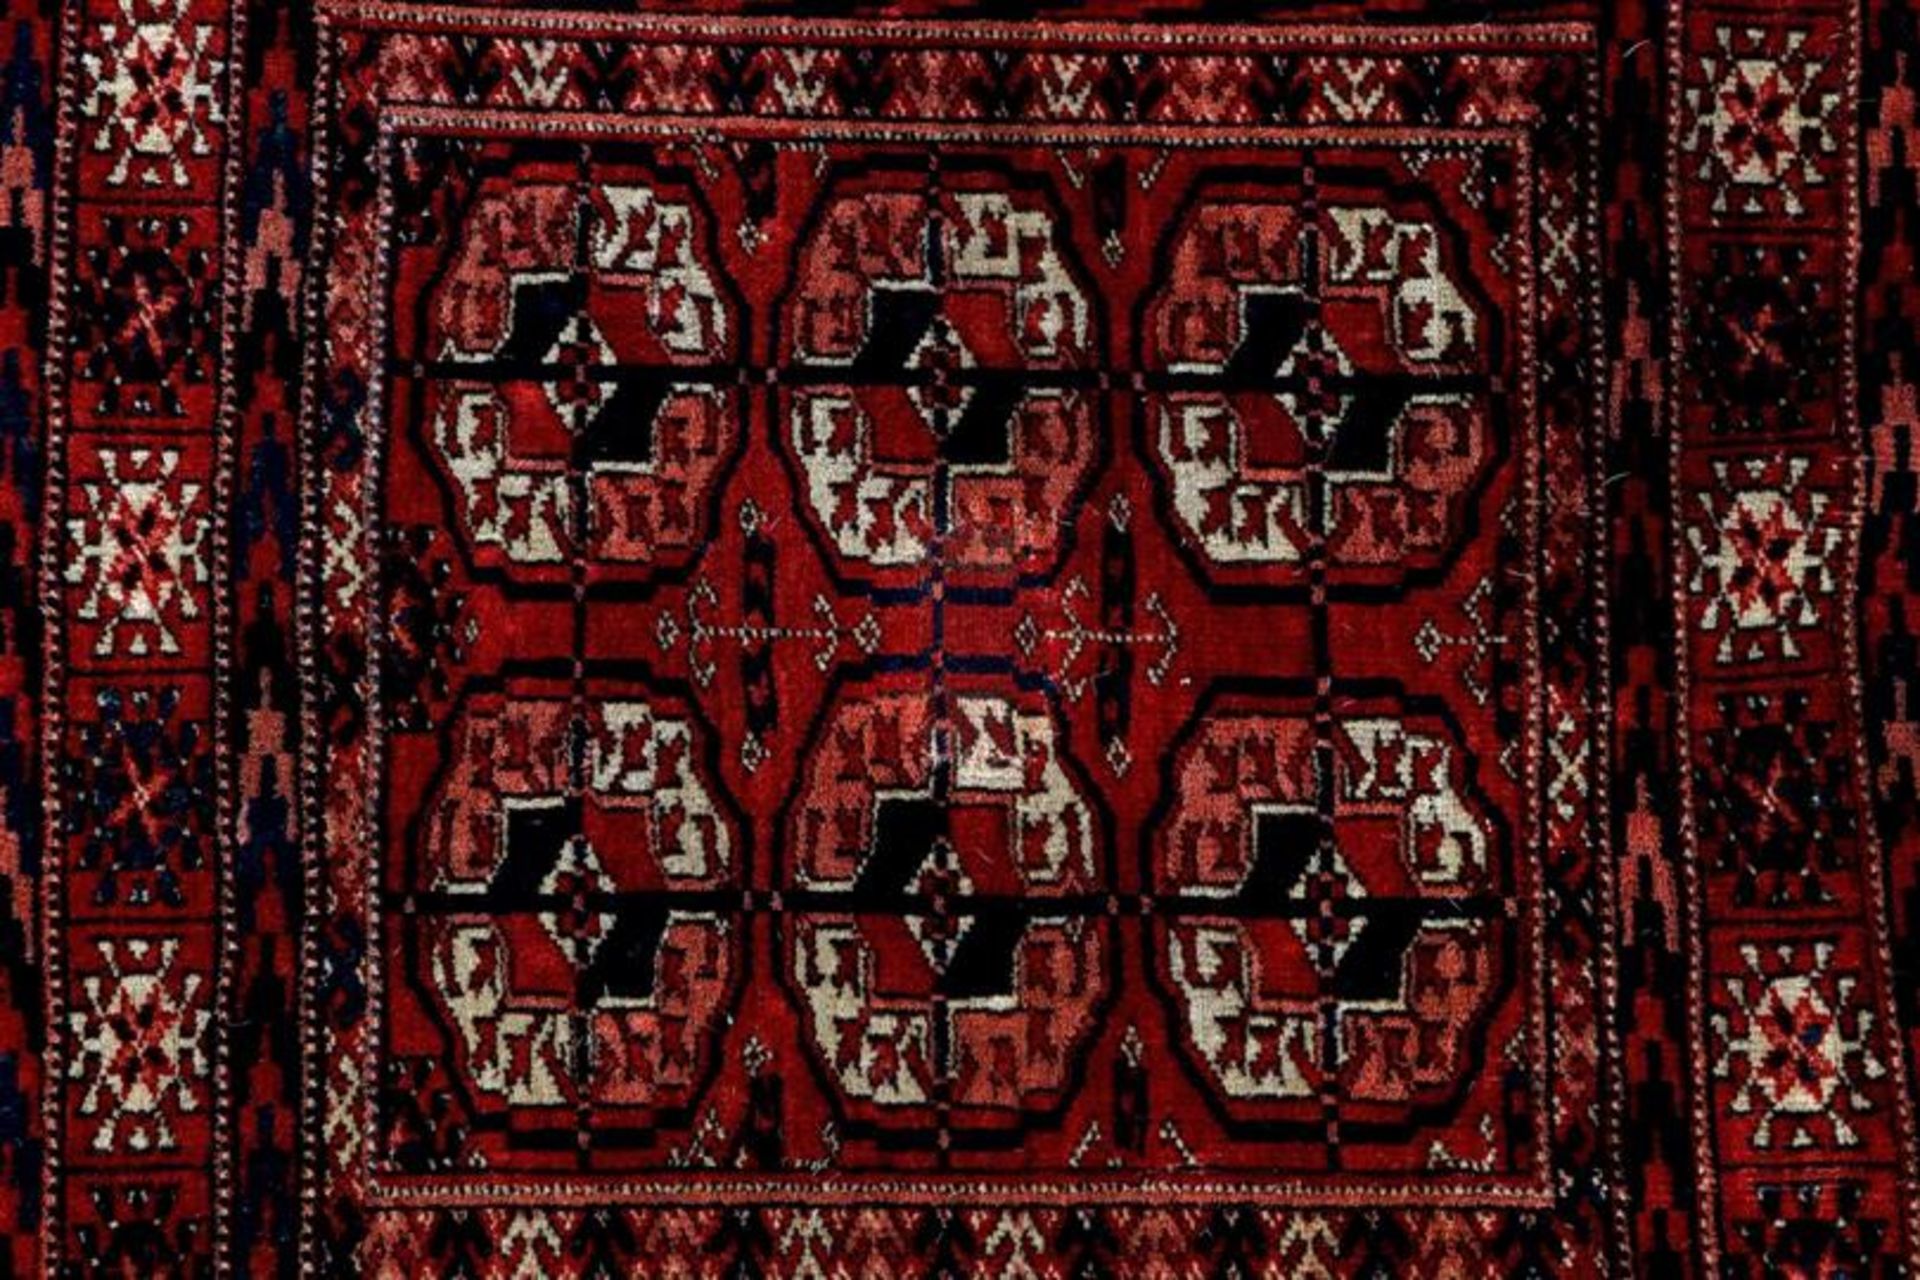 Hand-knotted wool carpet with Oriental decor Tekke mat, 90x83 cm - Image 2 of 3